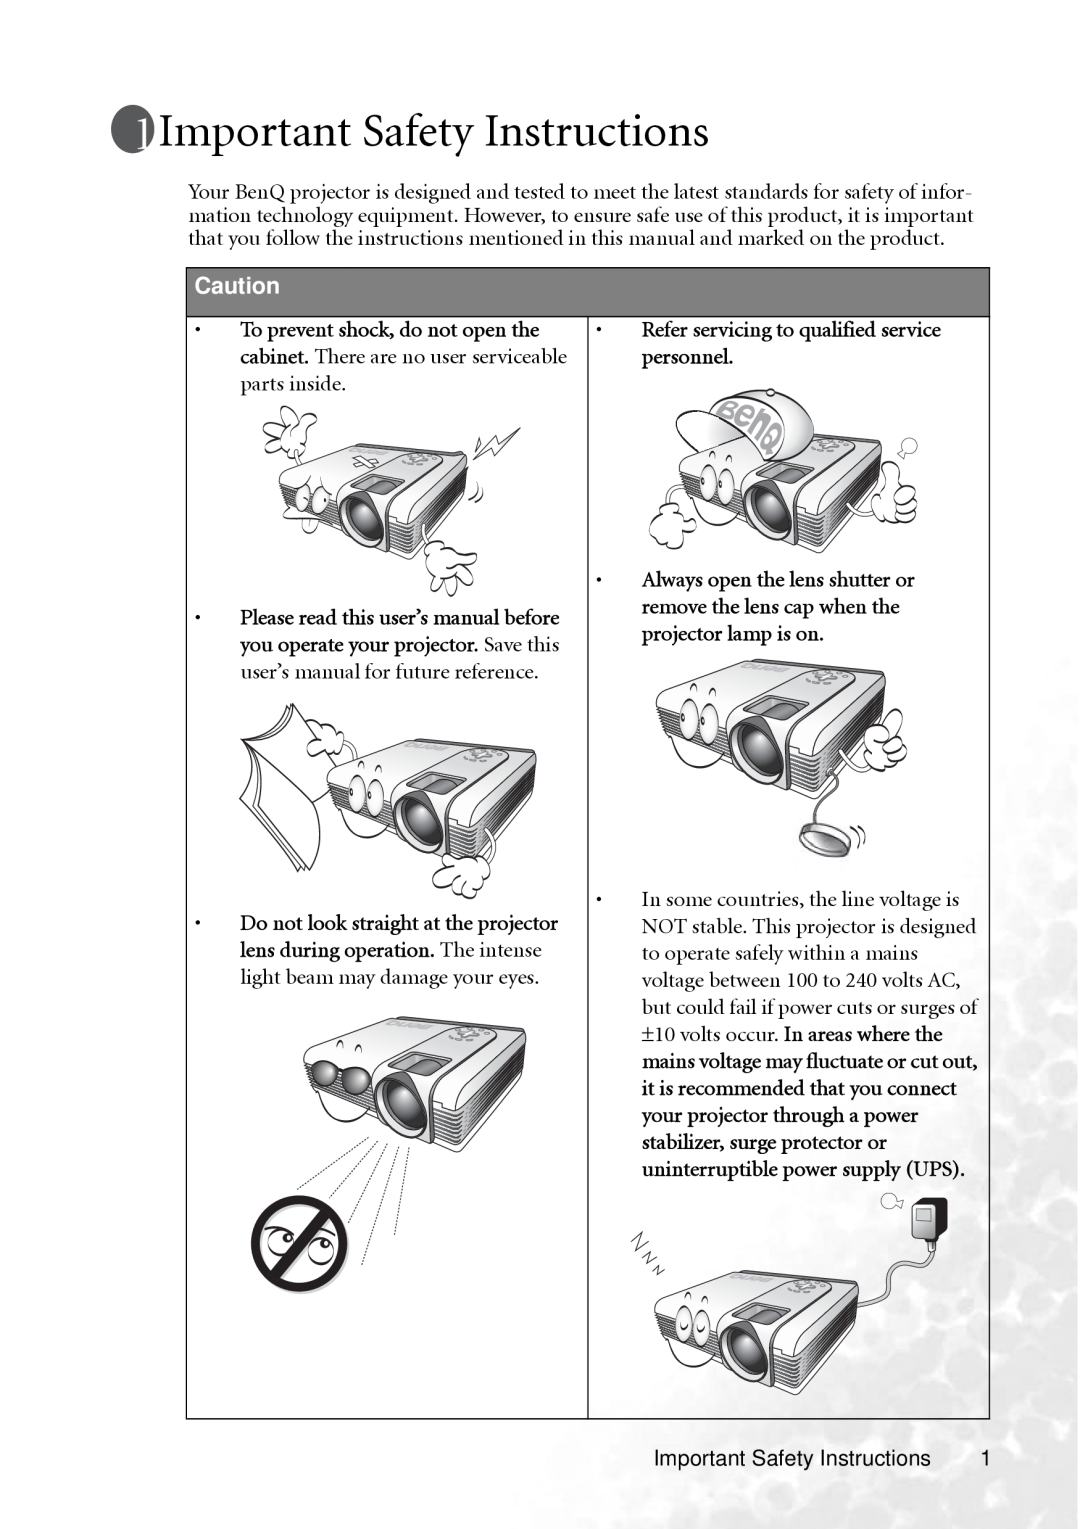 BenQ PB2240 user manual Important Safety Instructions, Refer servicing to qualified service personnel 